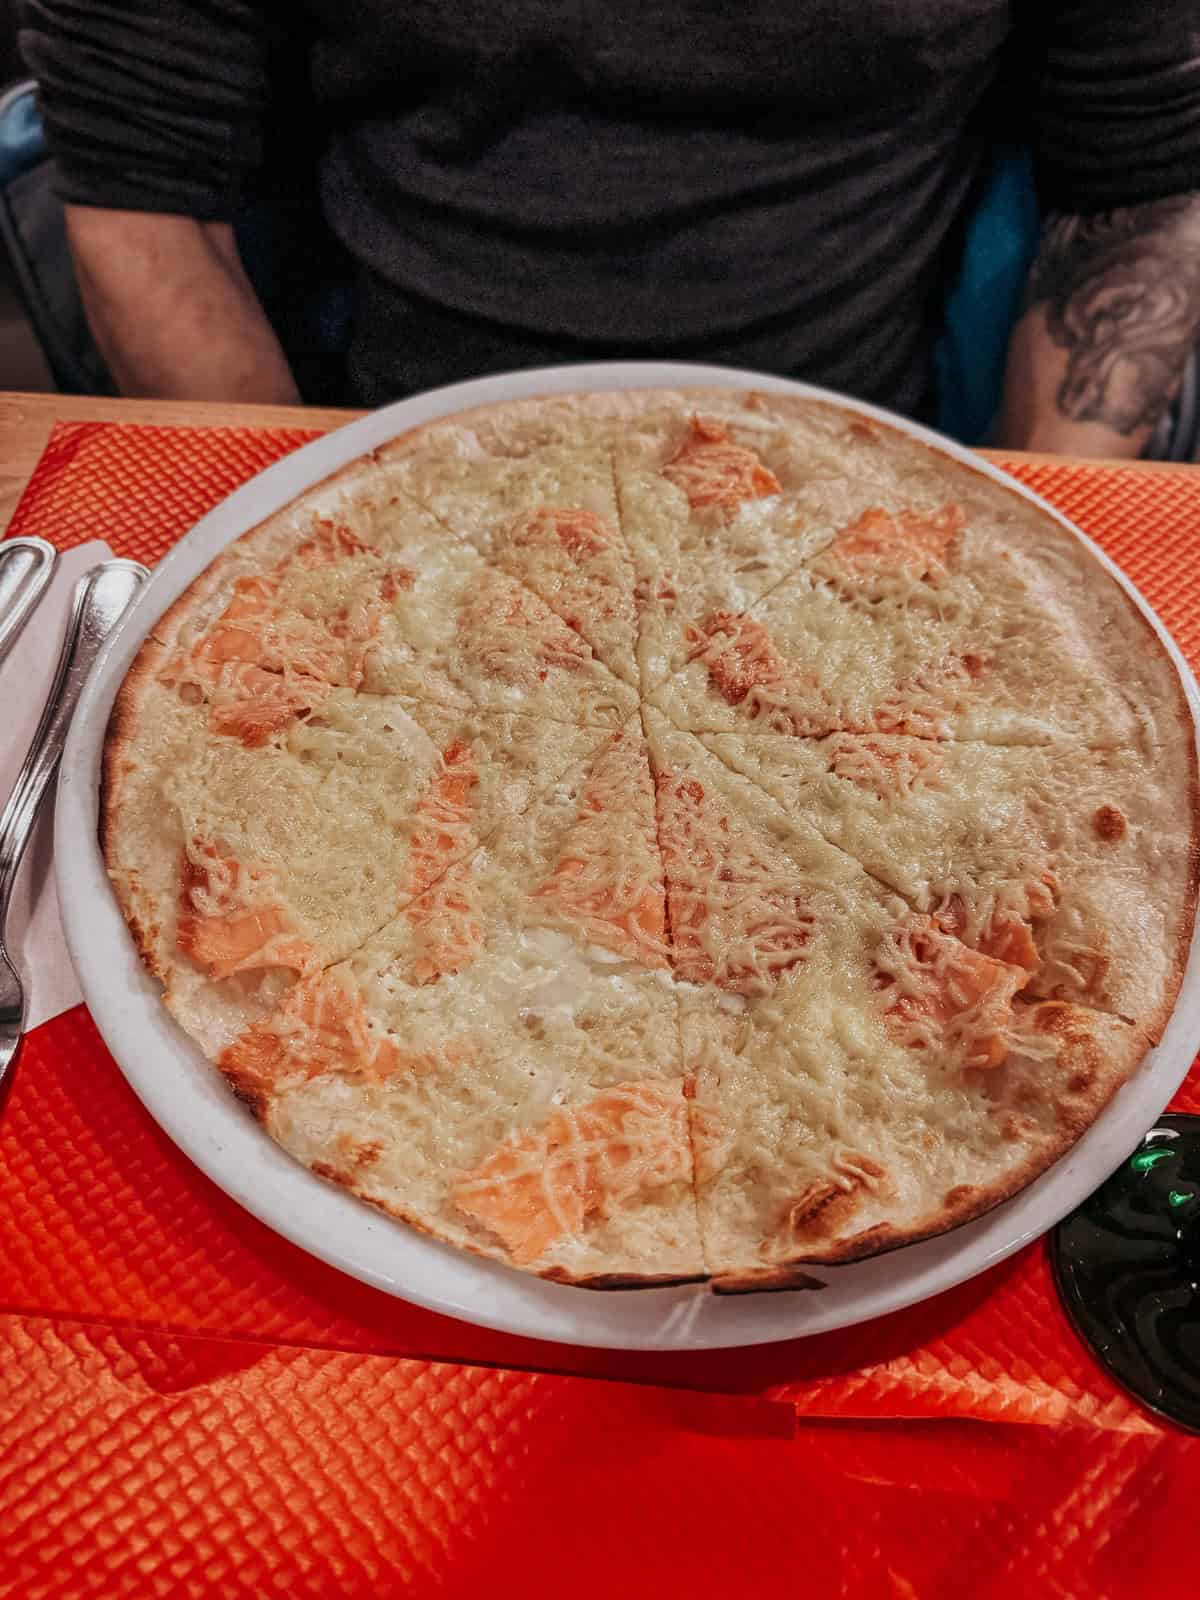 A large, freshly baked Tarte Flambée with a thin crust topped with cream, onions, and salmon, served on a white plate